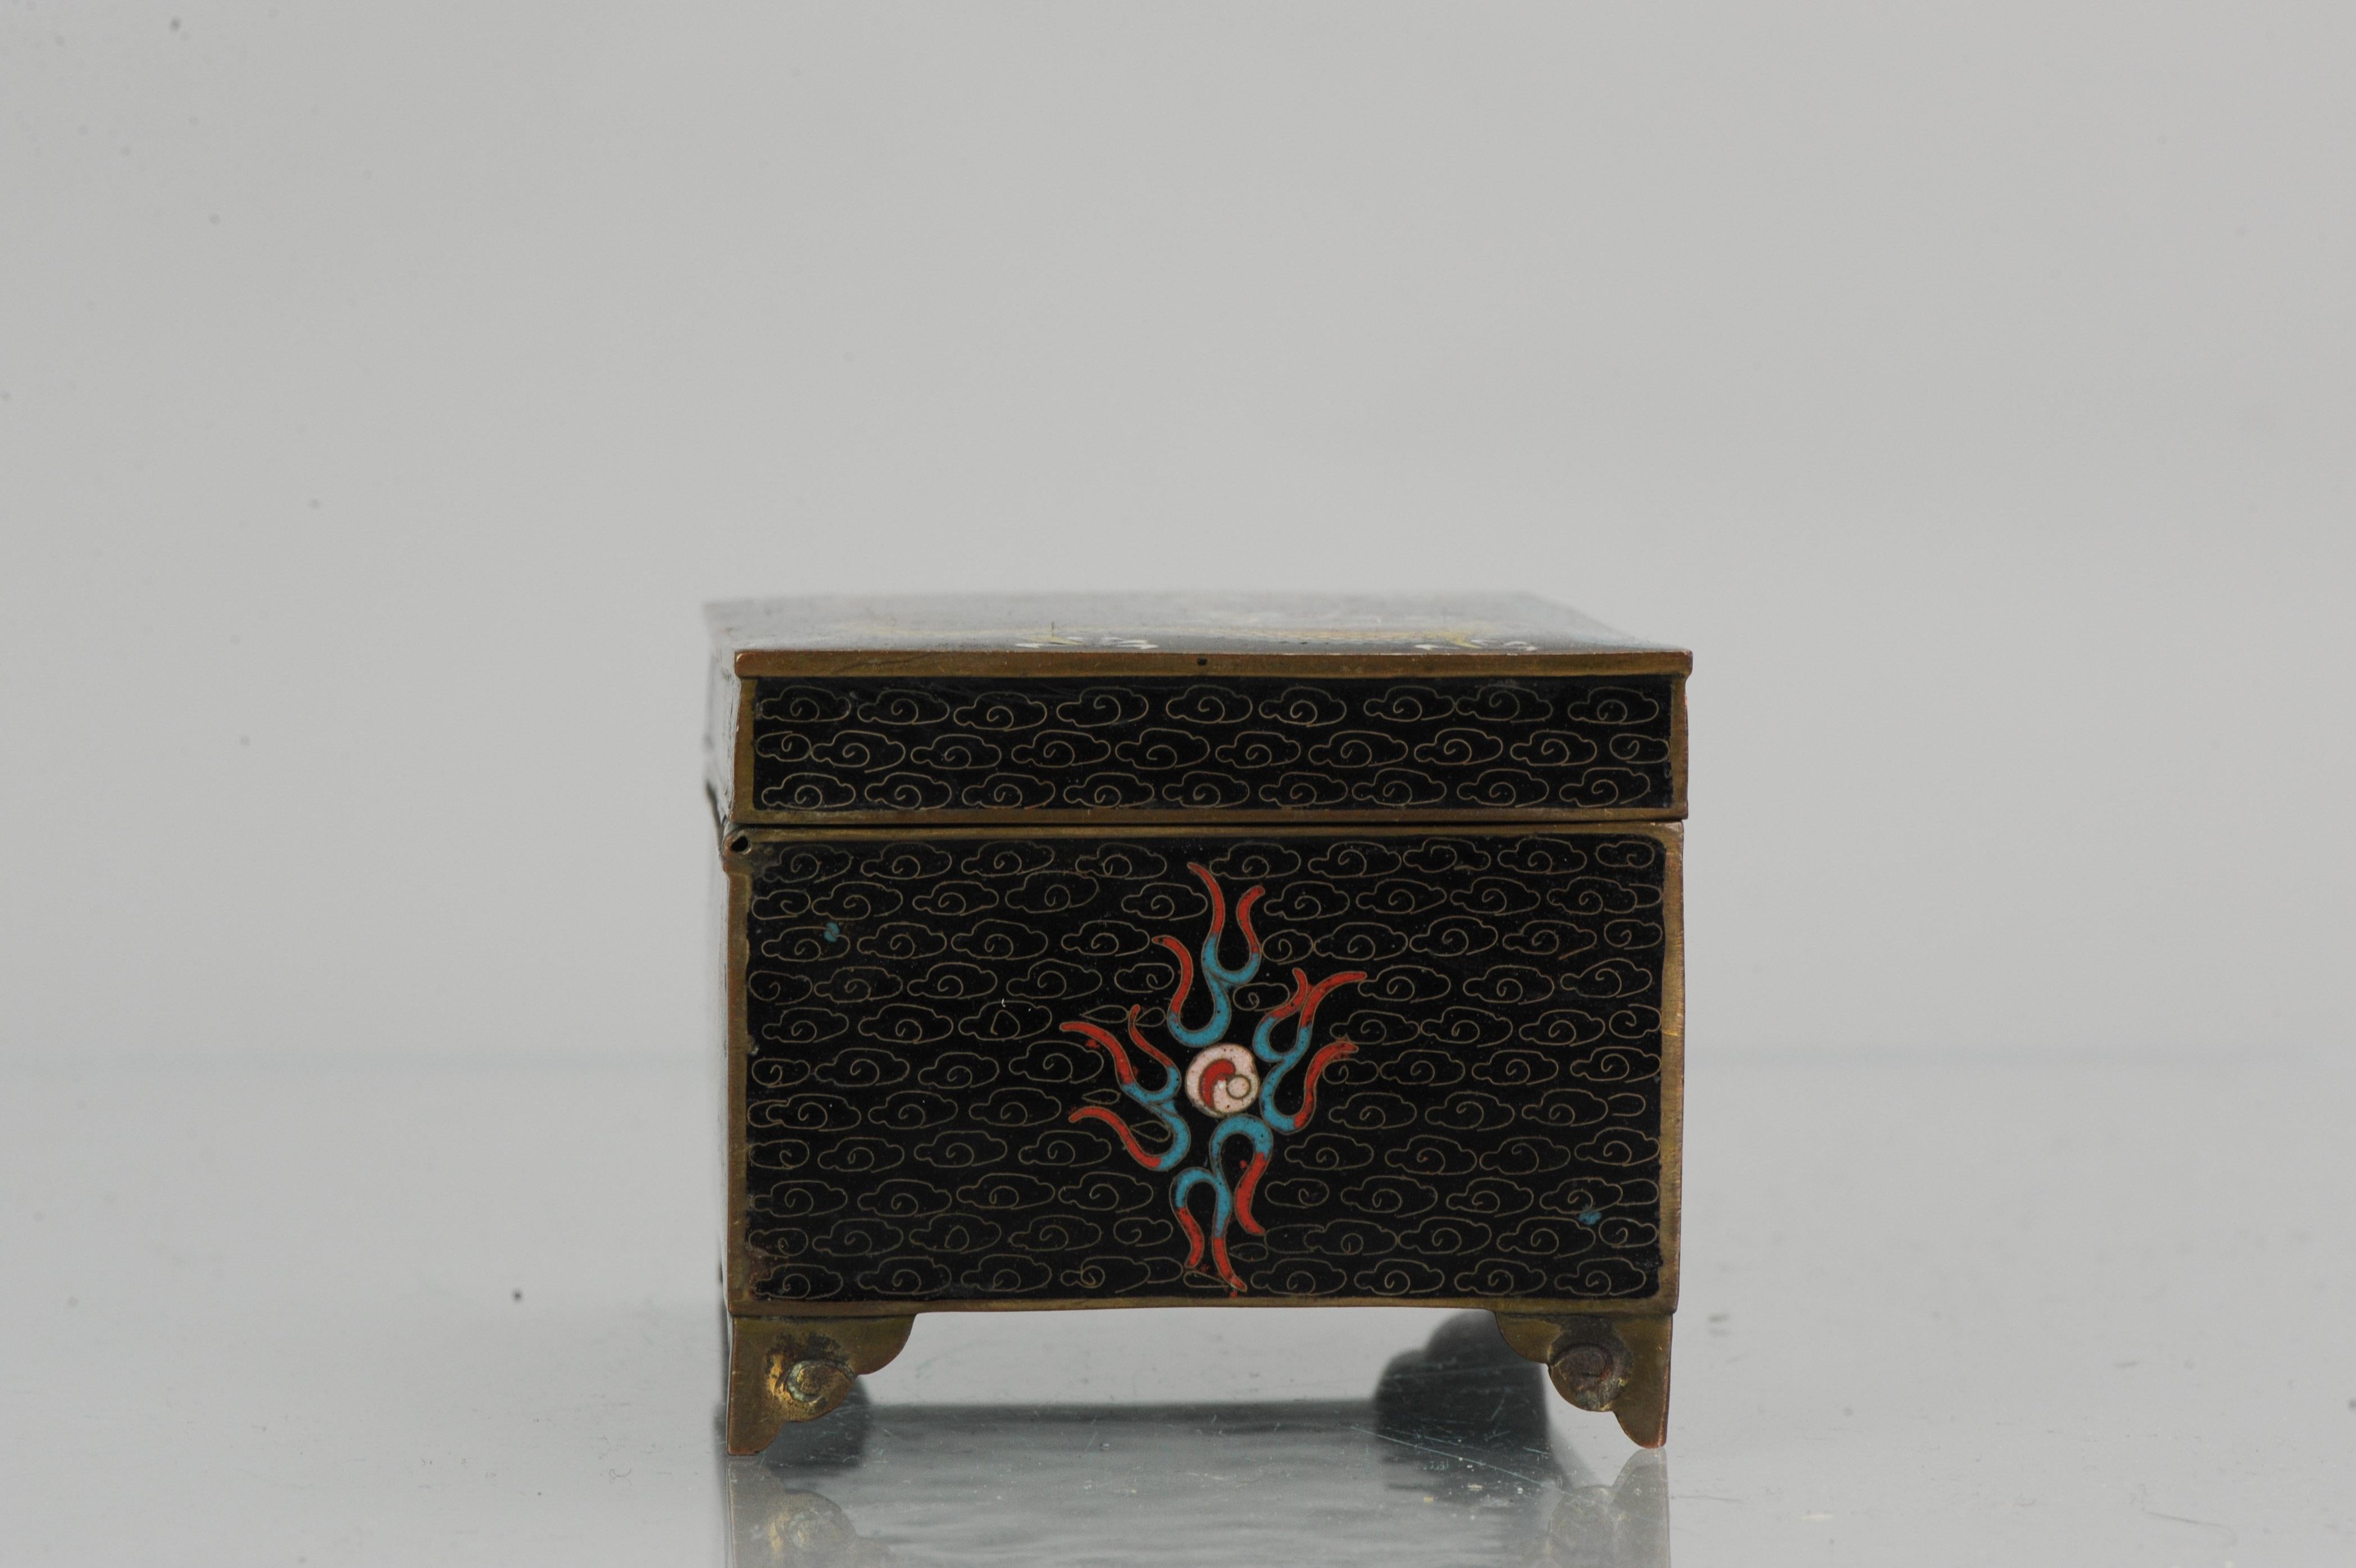 Top Antique Bronze / Copper Cloisonné Dragon Box China, 19th Century In Good Condition For Sale In Amsterdam, Noord Holland